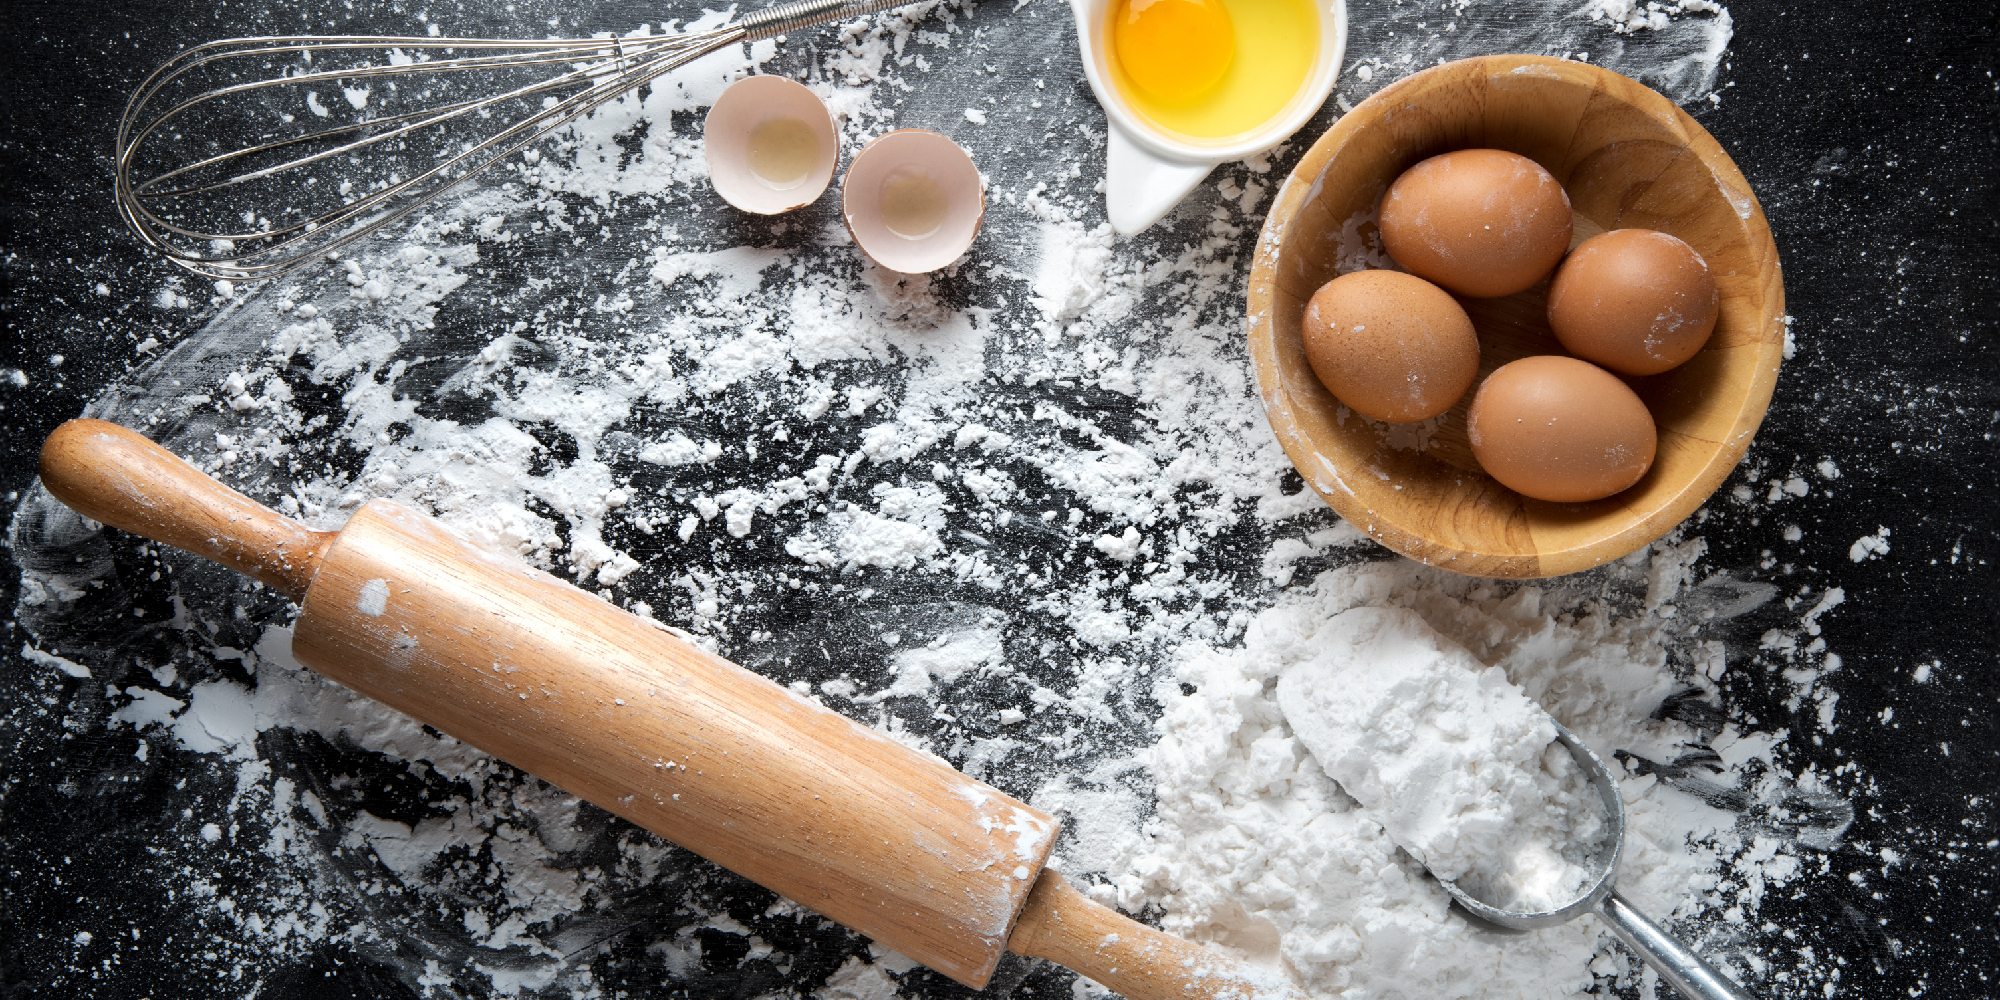 baking ingredients flour cracked eggs and rolling pin